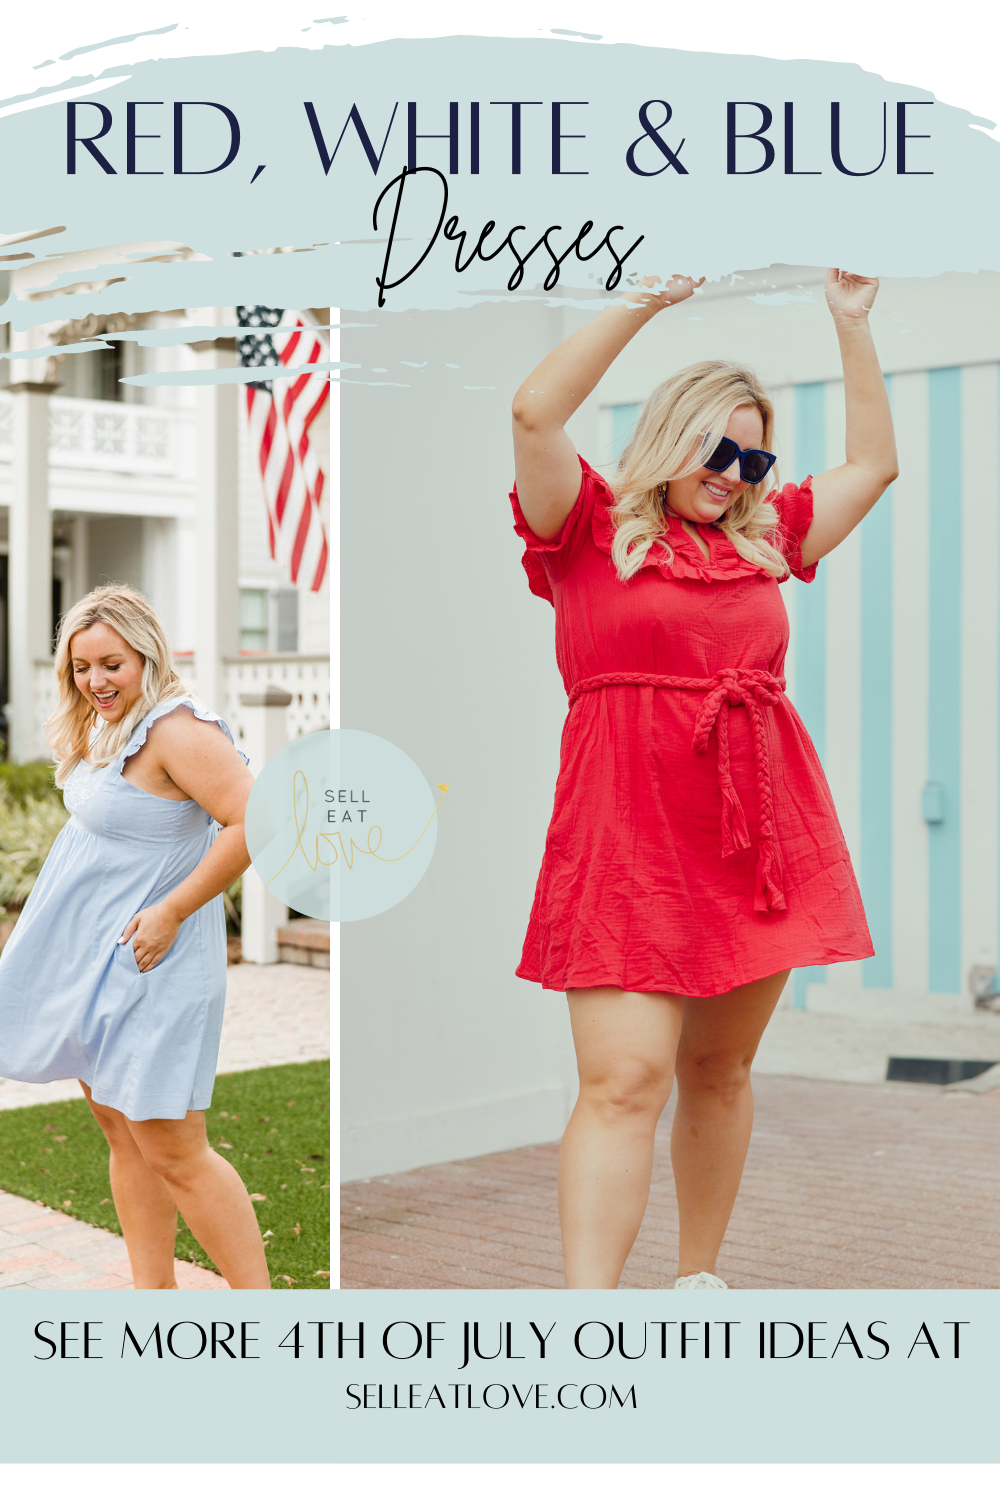 What to Wear 4th of July | Red, White & Blue Outfit Ideas - SELL EAT LOVE